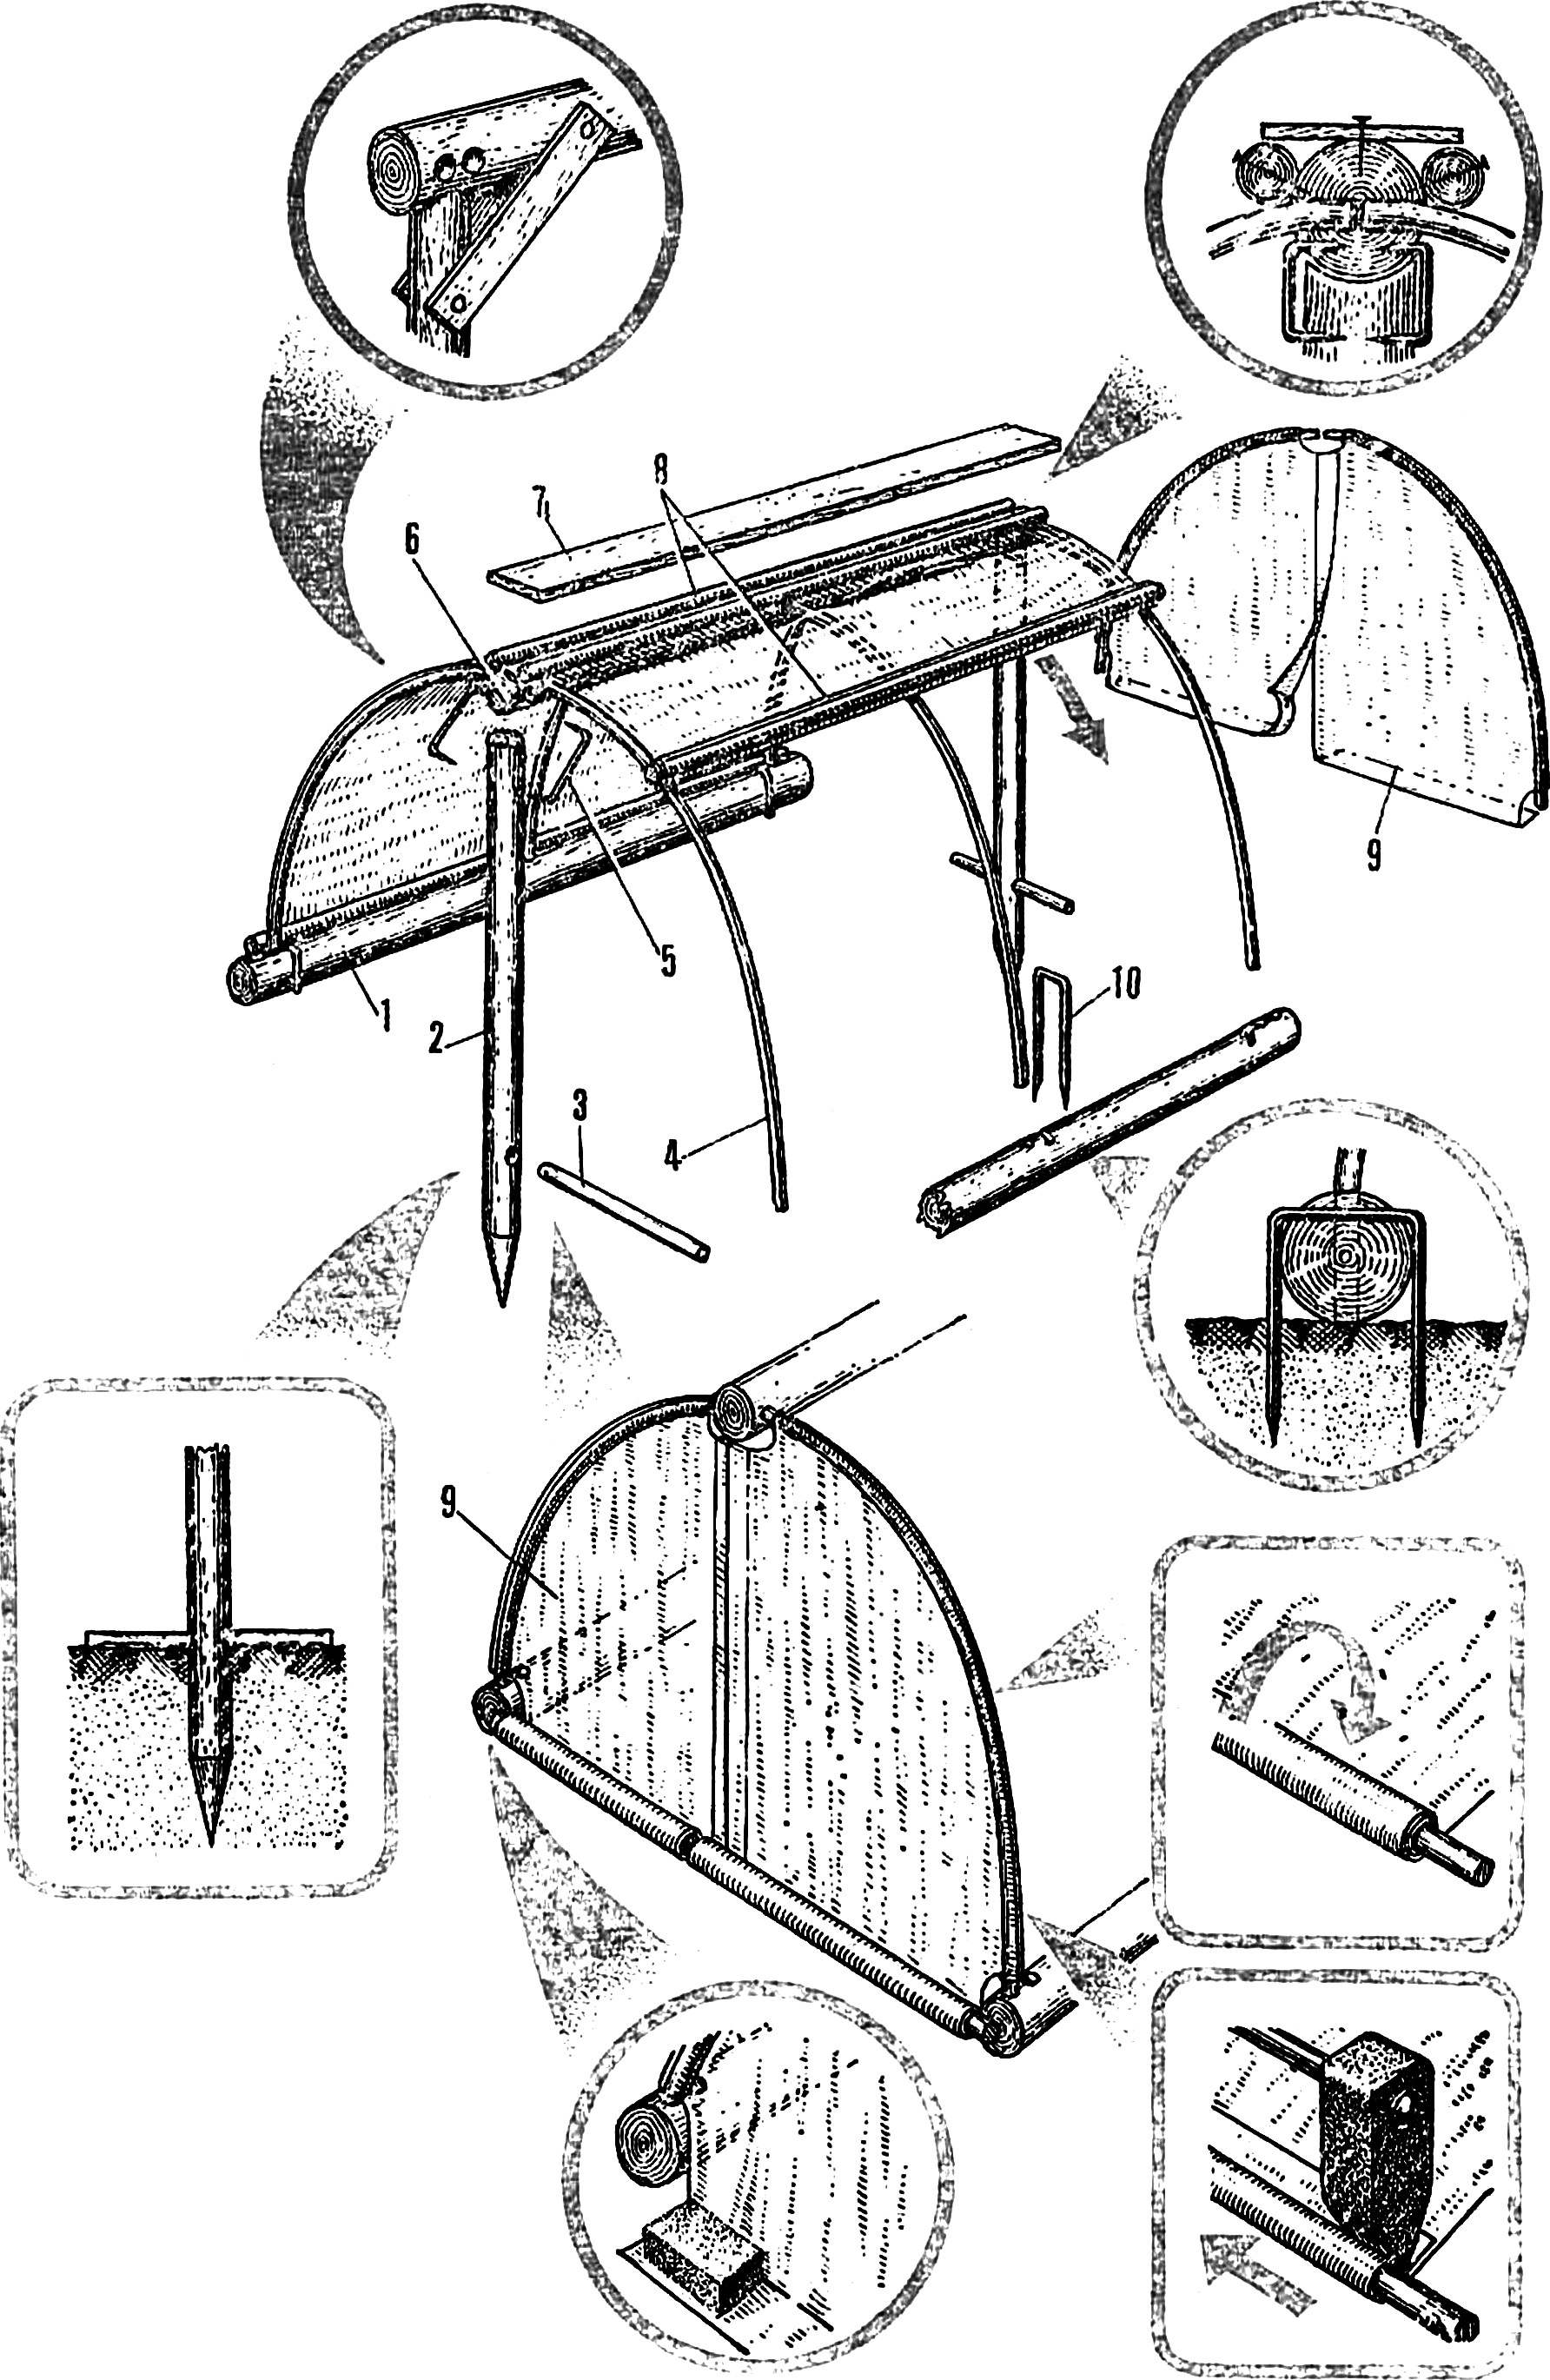 Fig. 2. The design of the greenhouse.